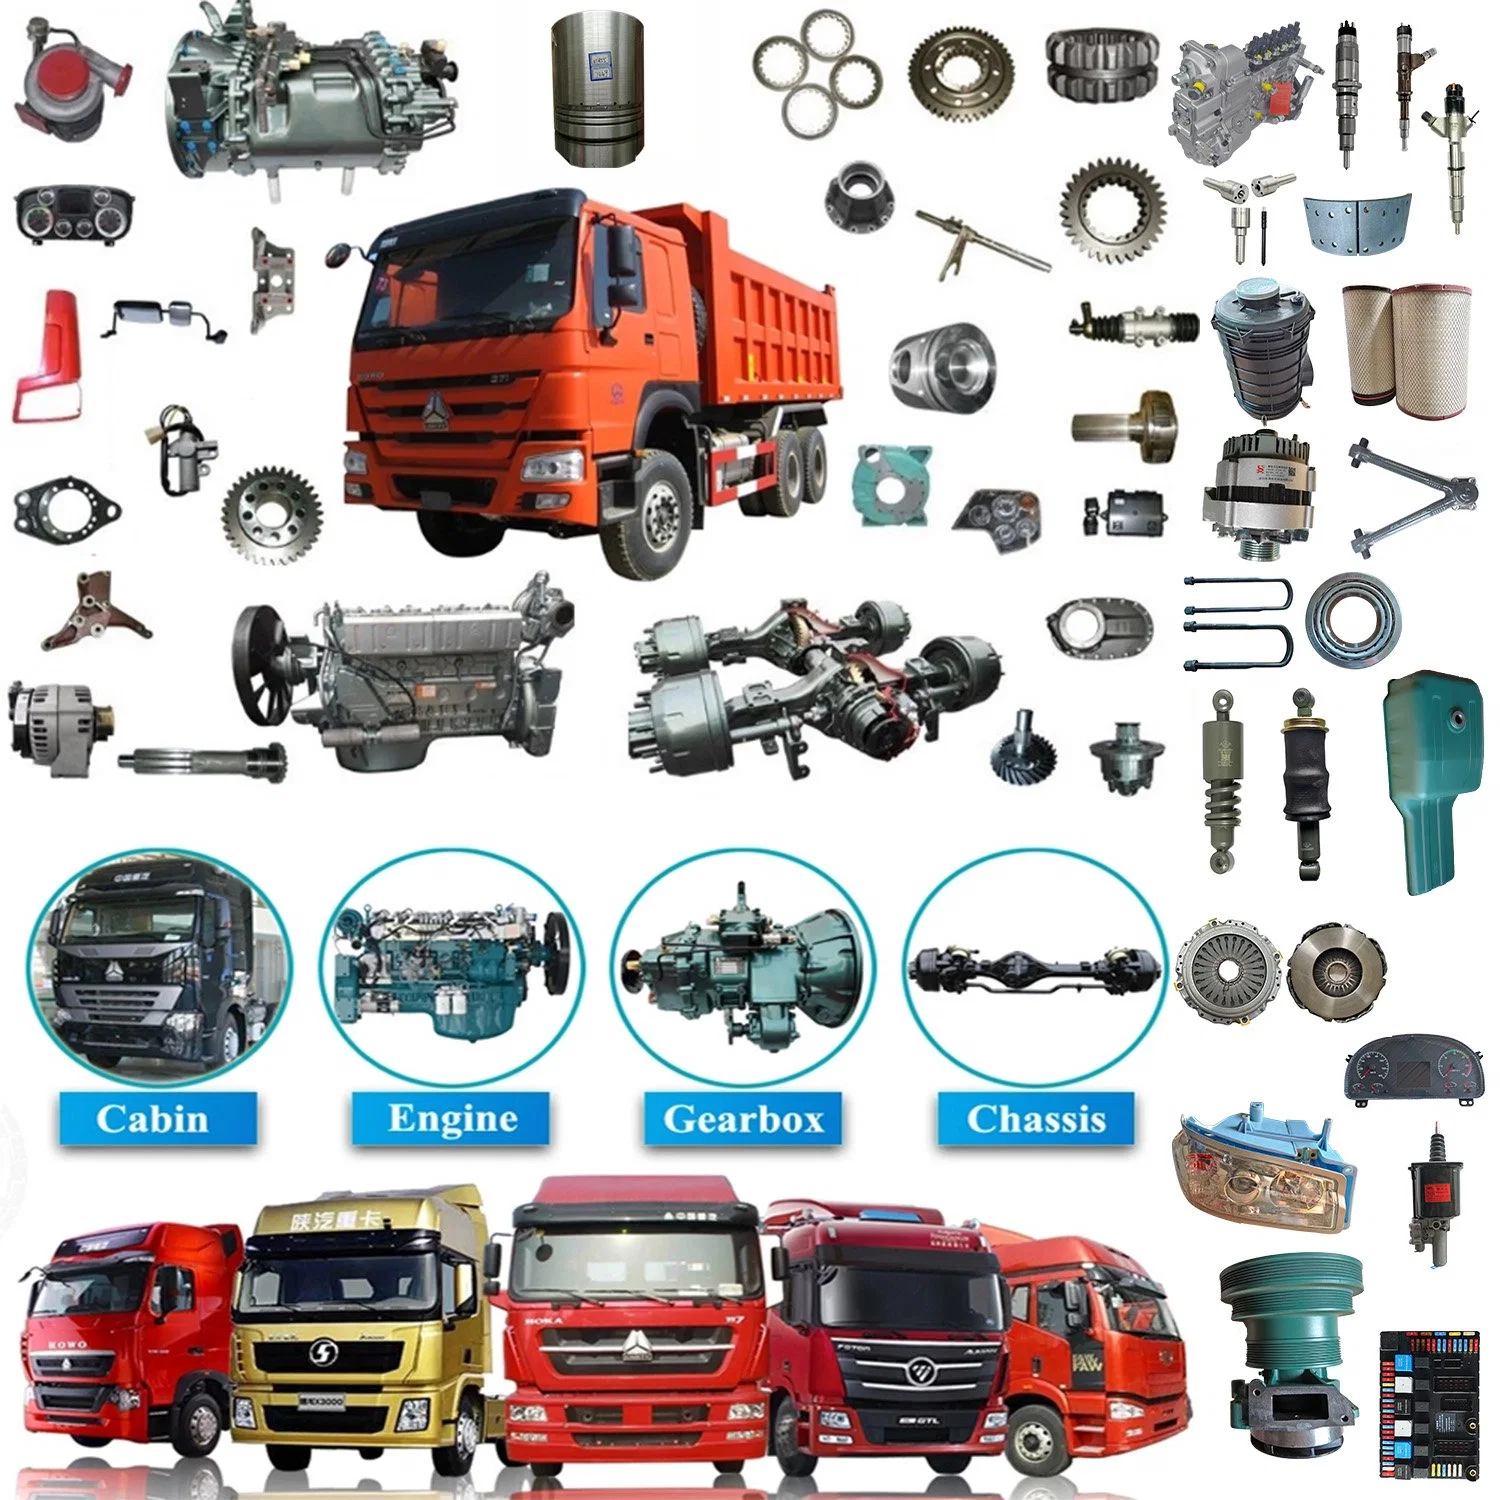 Discount Price Sinotruk HOWO Heavy Truck Wd615 Engine Spare Parts